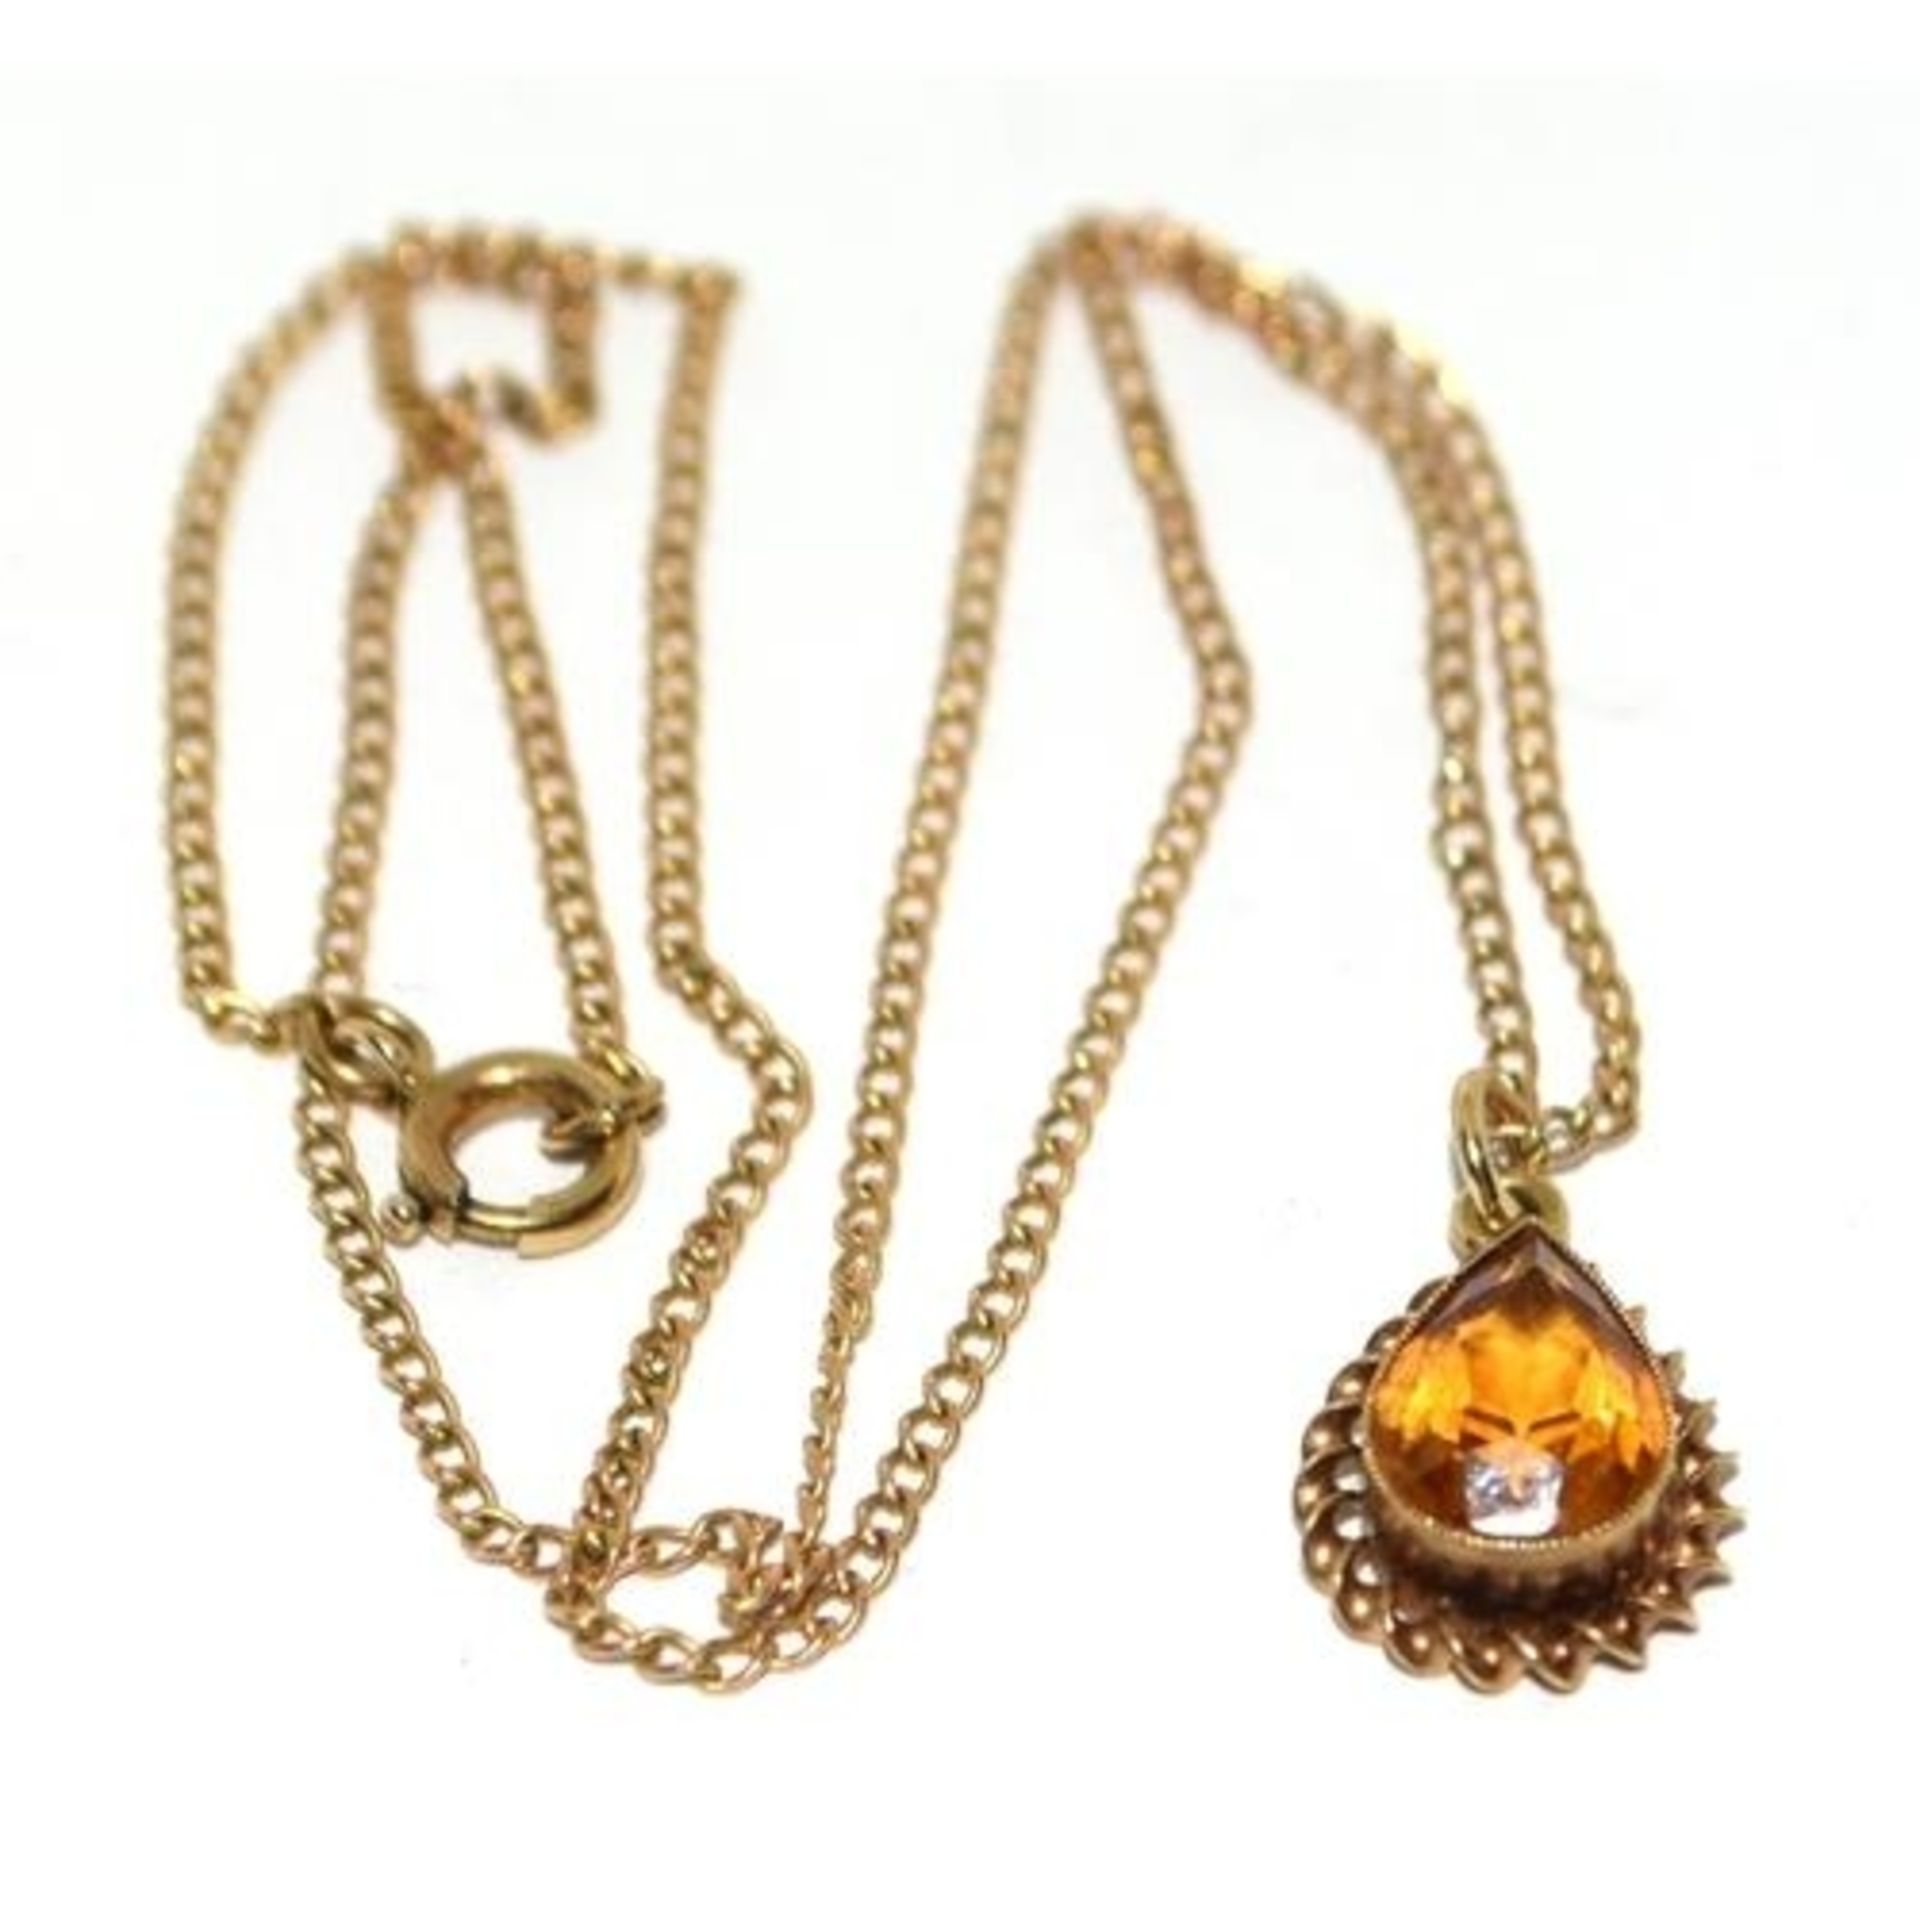 9ct gold Amber pendant necklace chain 42cm long 3g